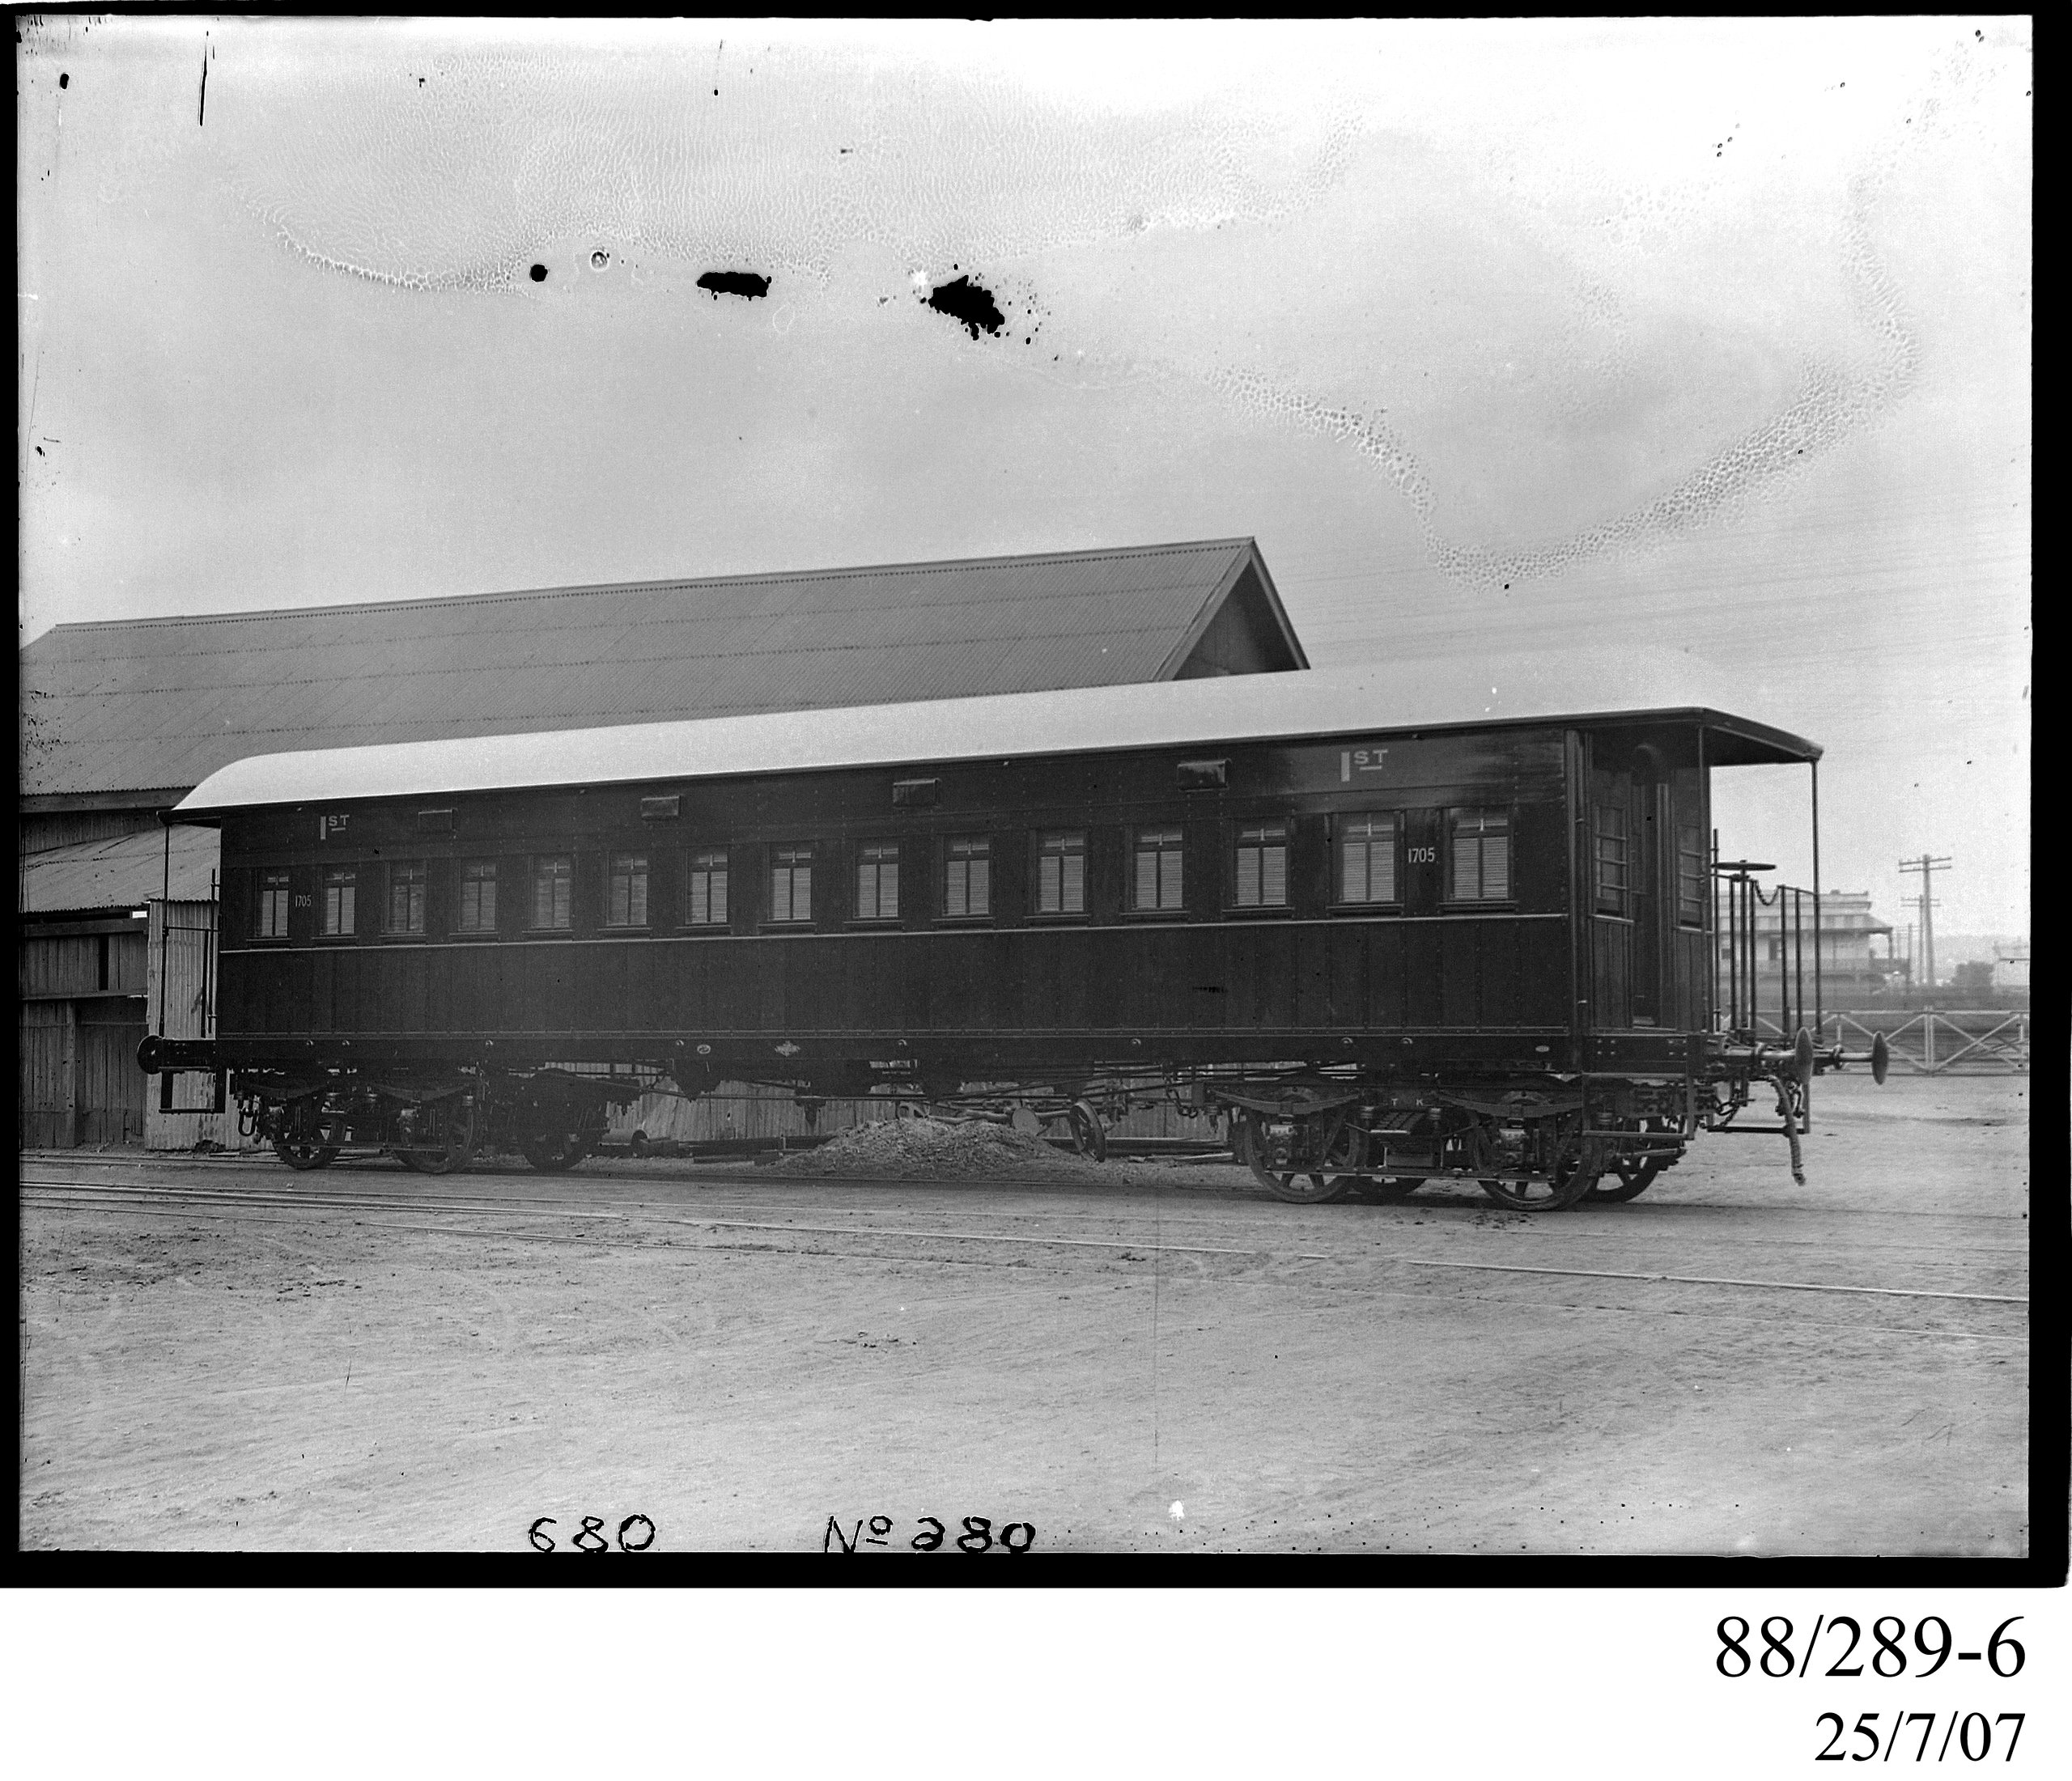 Glass plate negative of a railway carriage by Clyde Engineering